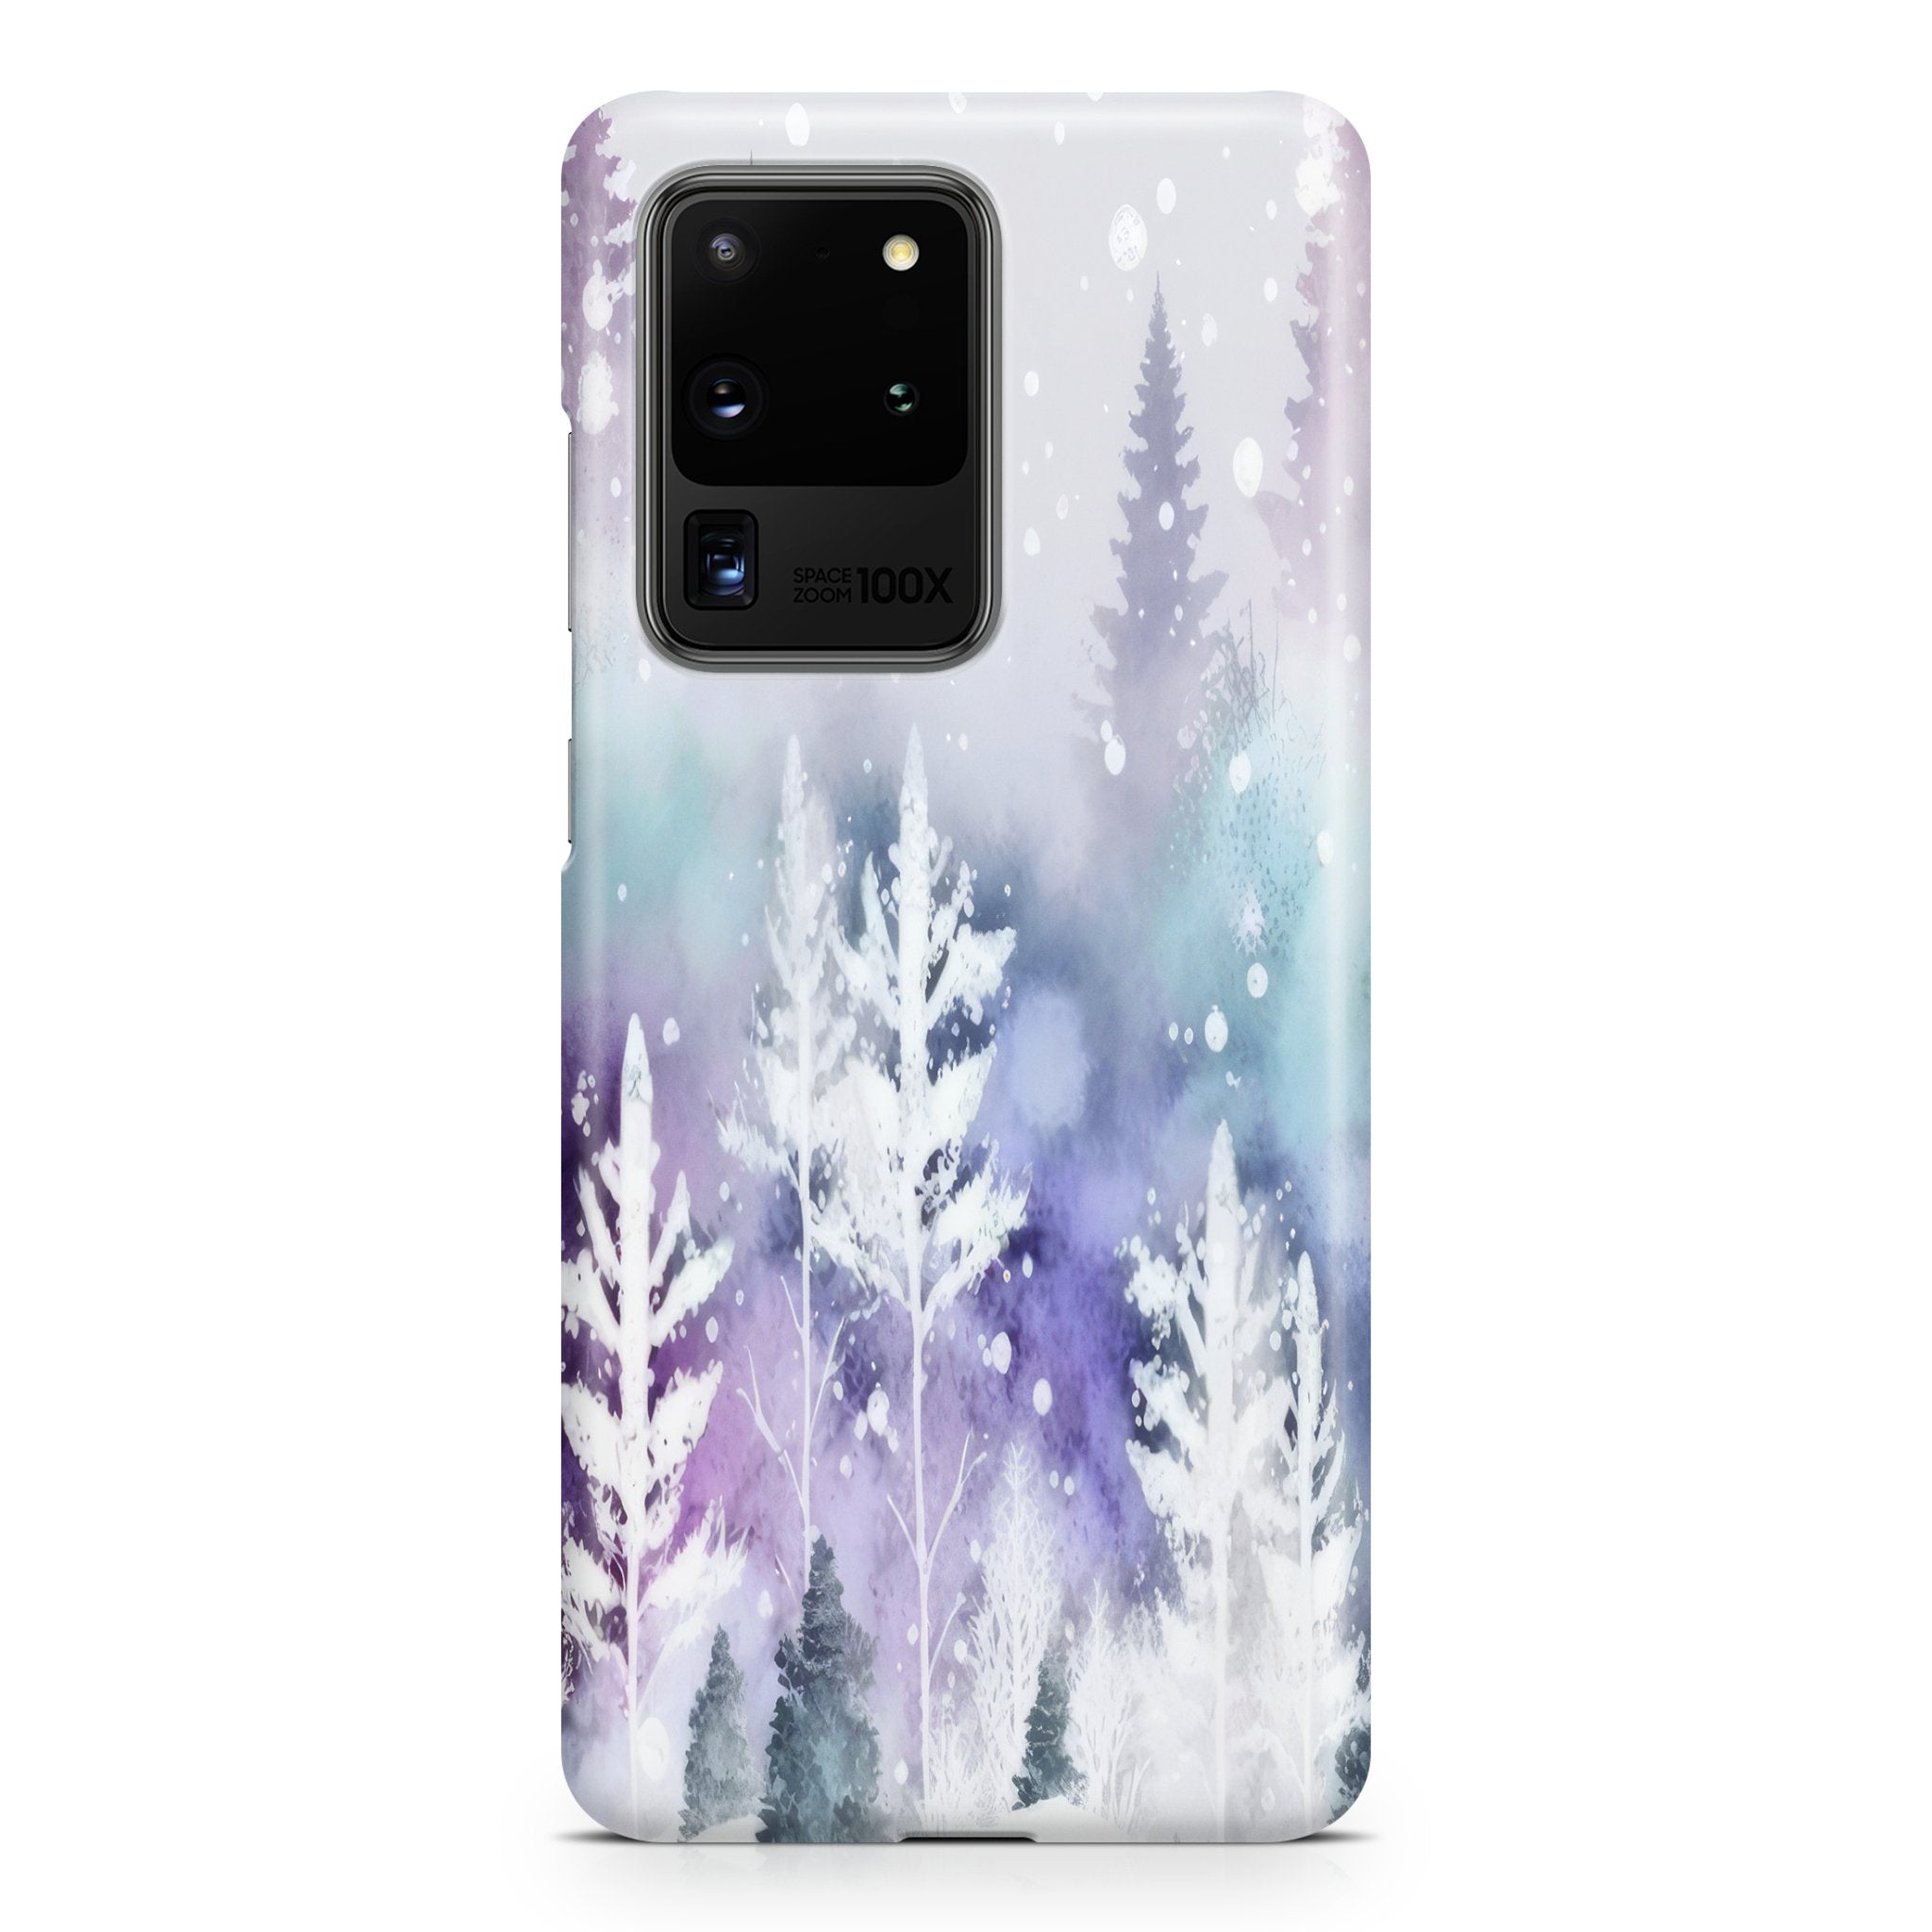 Alta Pines - Samsung phone case designs by CaseSwagger